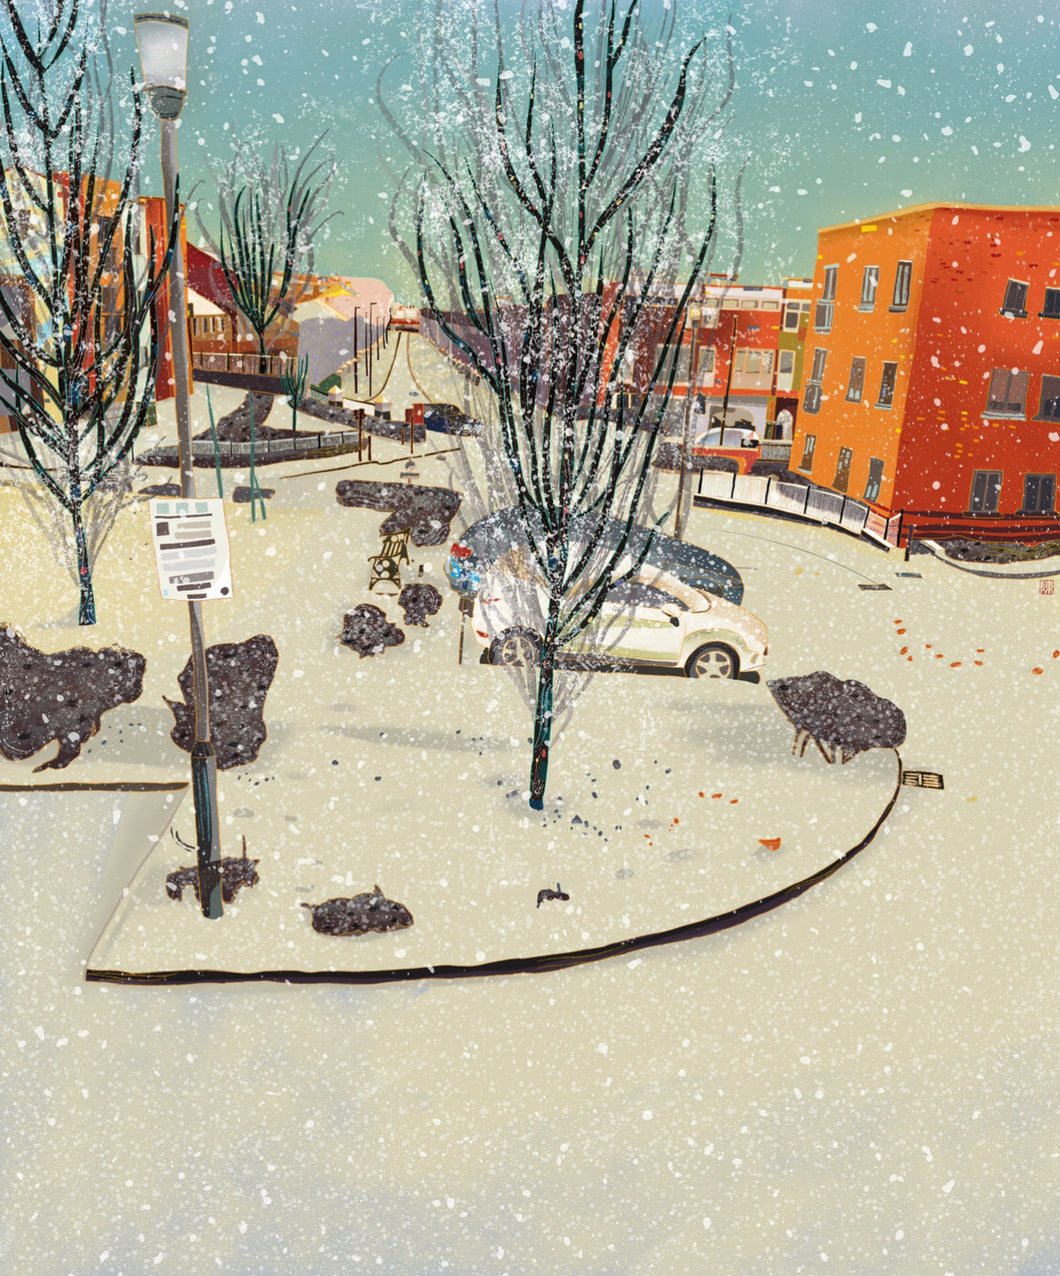 Wintry Tannoy Square local art illustration poster print wall decor